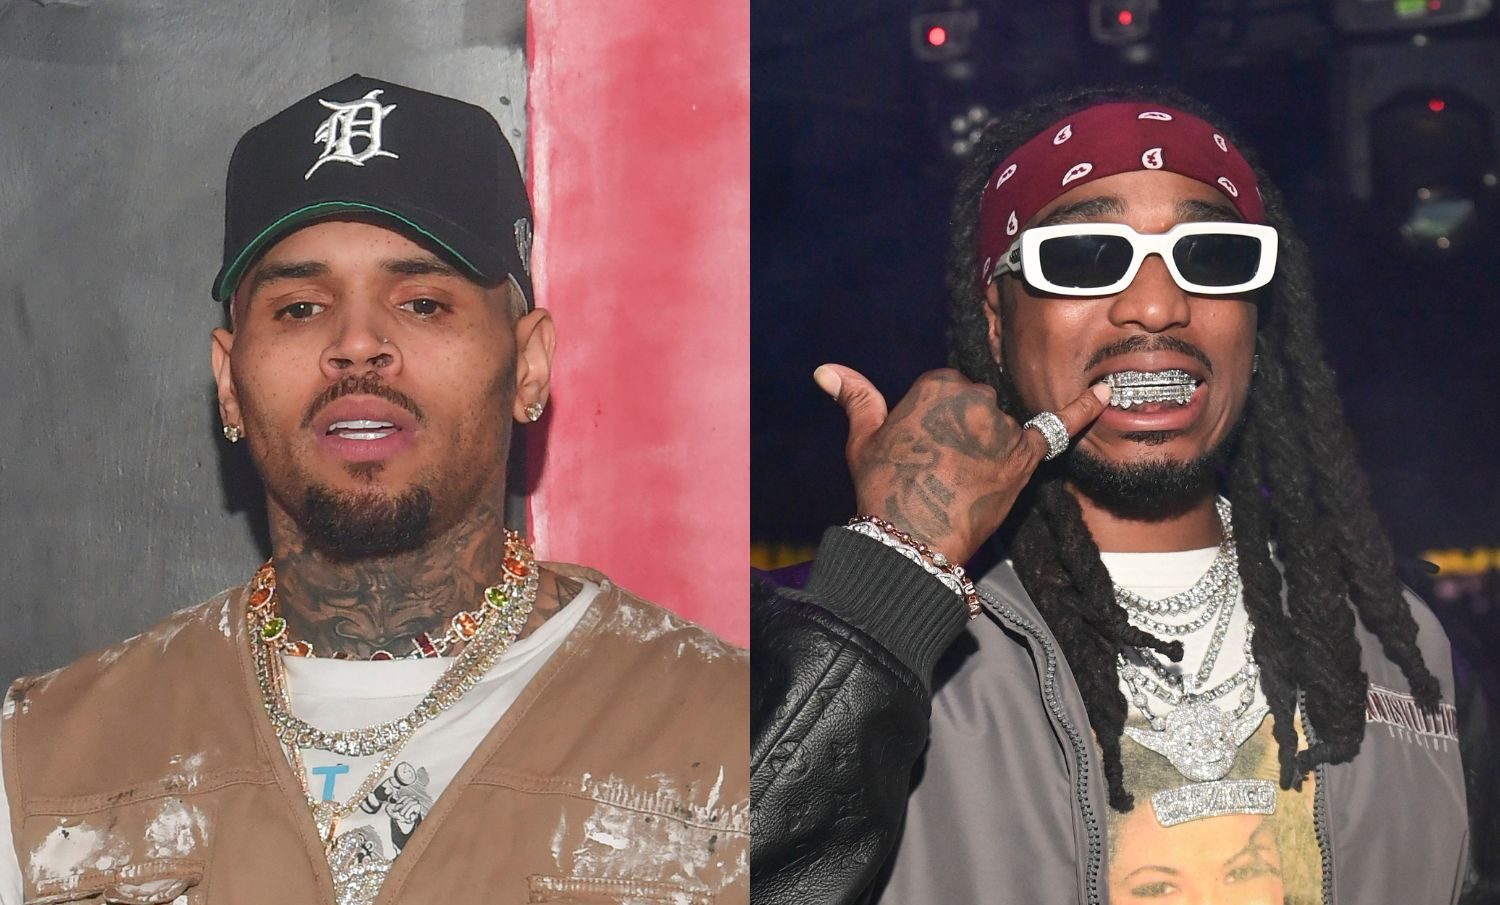 Chile! Chris Brown Goes IN On Quavo In New Diss Track ‘Weakest Link’ (LISTEN)